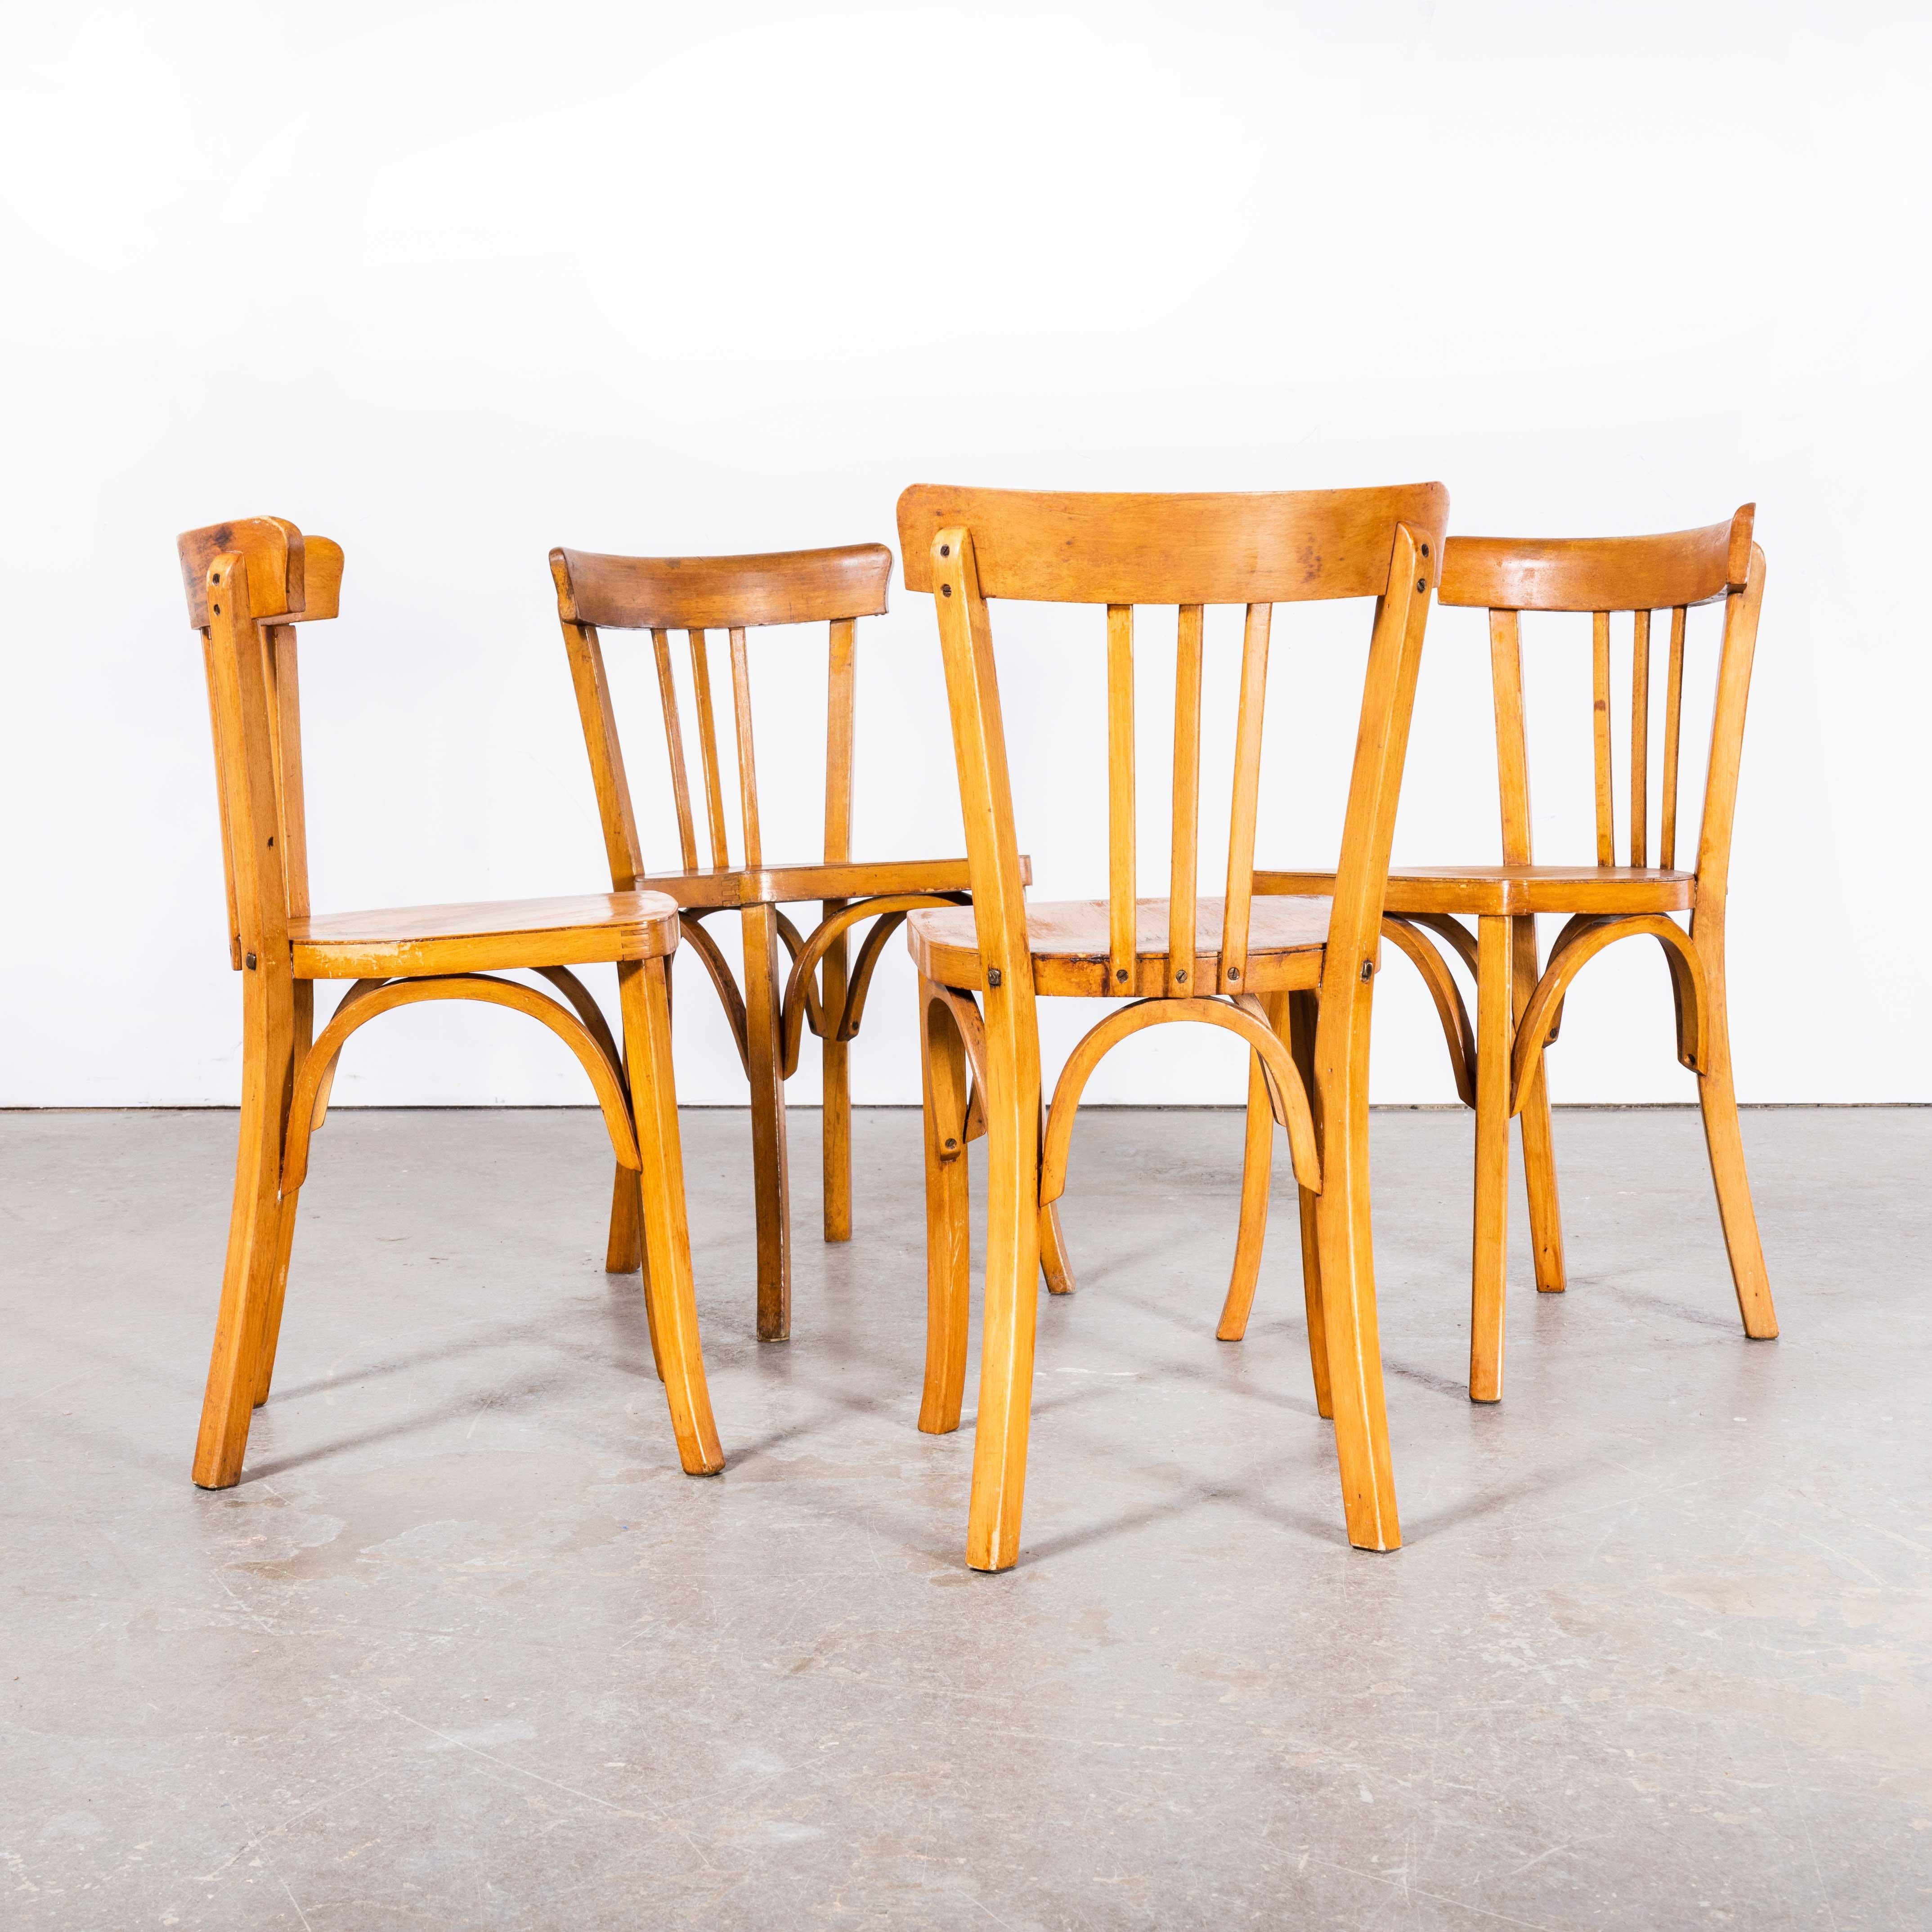 1950s Baumann Honey Tri Back Dining Chair - Set of Four For Sale 4